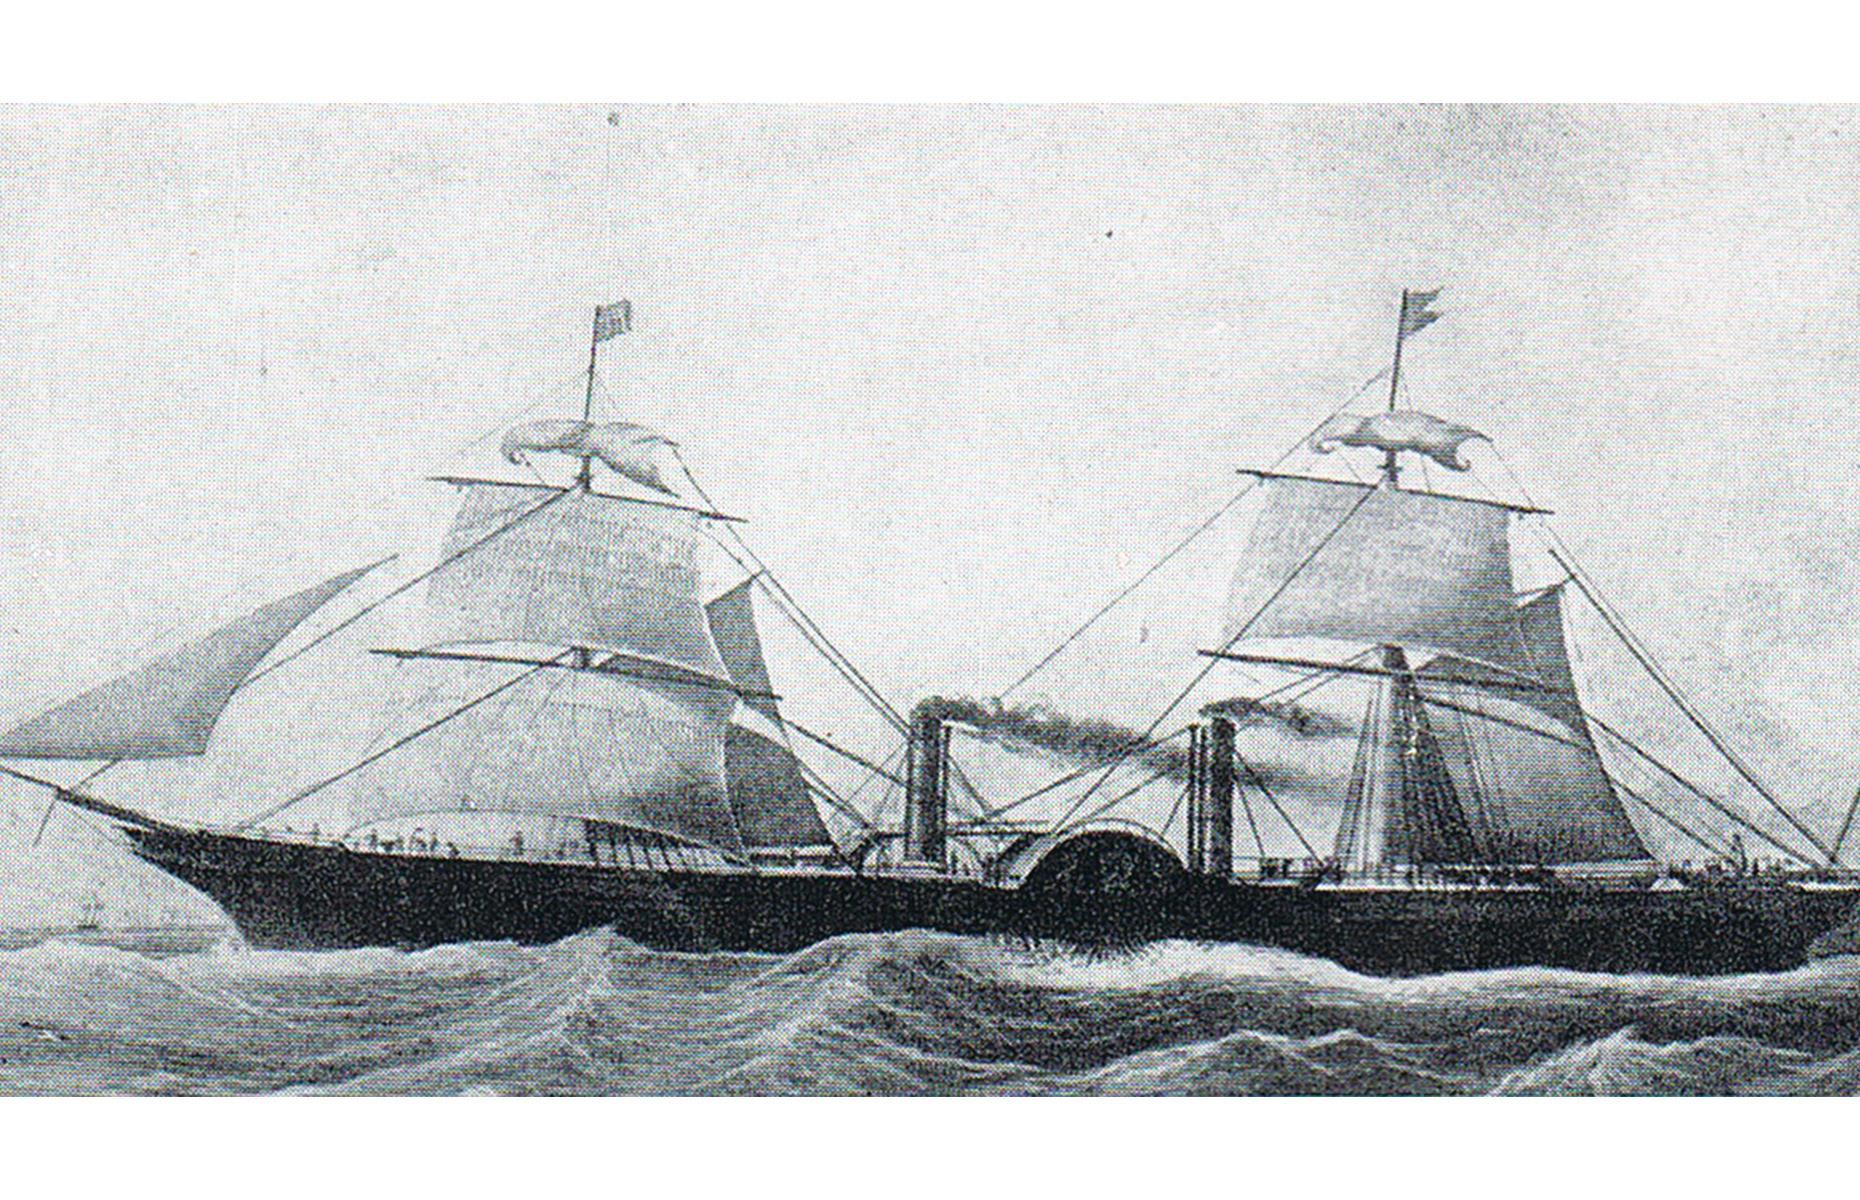 Passenger cruising continued to develop through the mid-19th century, with luxuries like on-board lounges and simple entertainment emerging. Shown here, in 1856, is Cunard's RMS Persia, one of the largest ships of her time and an early Blue Riband winner (an award given for high-speed Atlantic crossings).